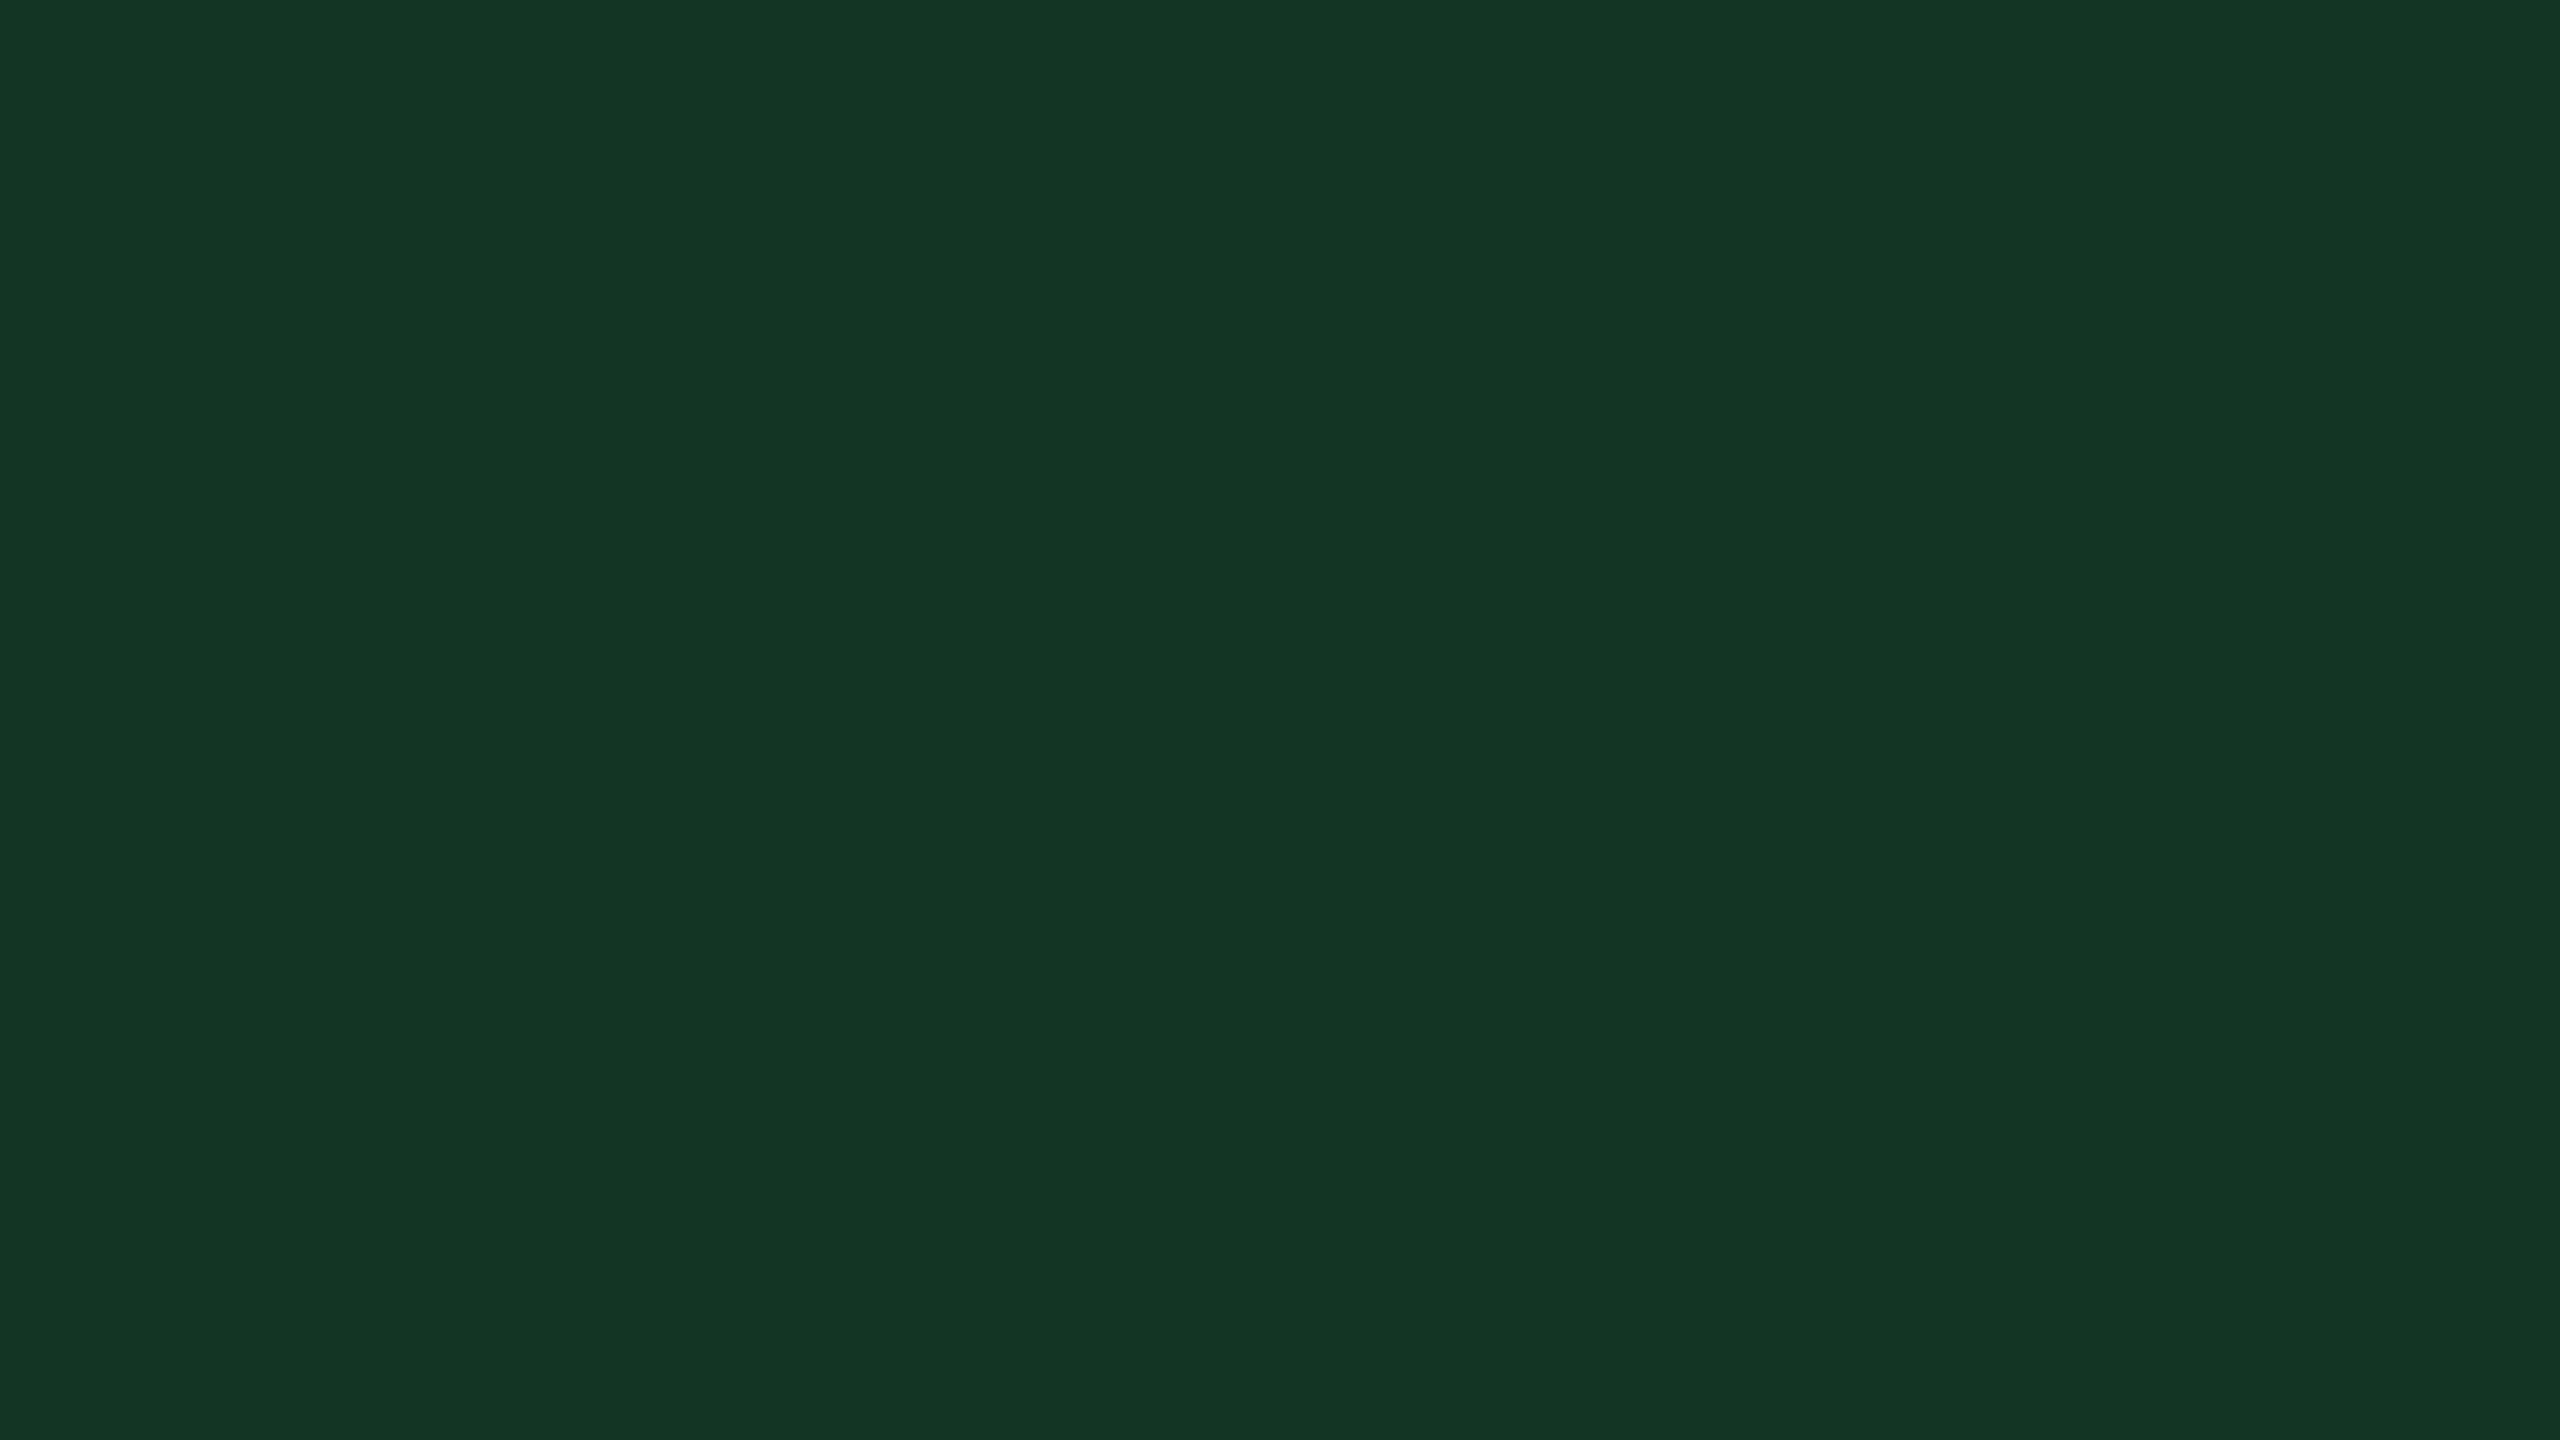 2560x1440 Phthalo Green Solid Color Background